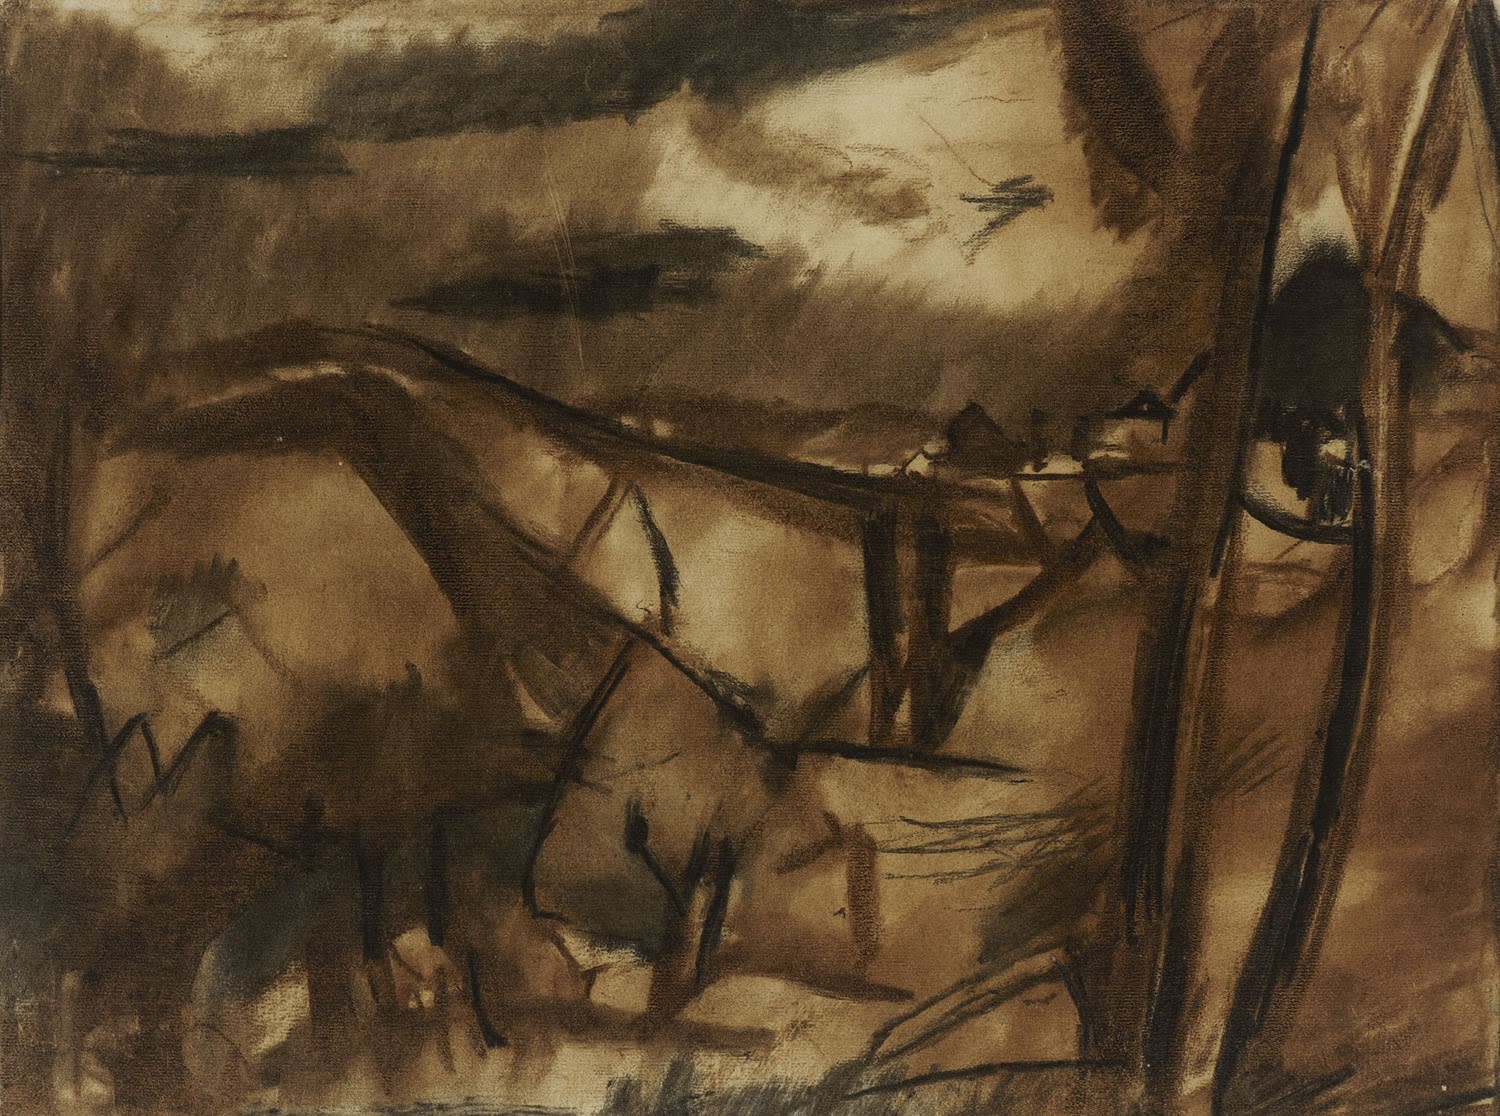 David Bomberg (1890-1957) Ronda, Spain c.1954-56 Charcoal on paper 45.5 x 61 cm Ben Uri Collection © David Bomberg estate To see and discover more about this artist click here